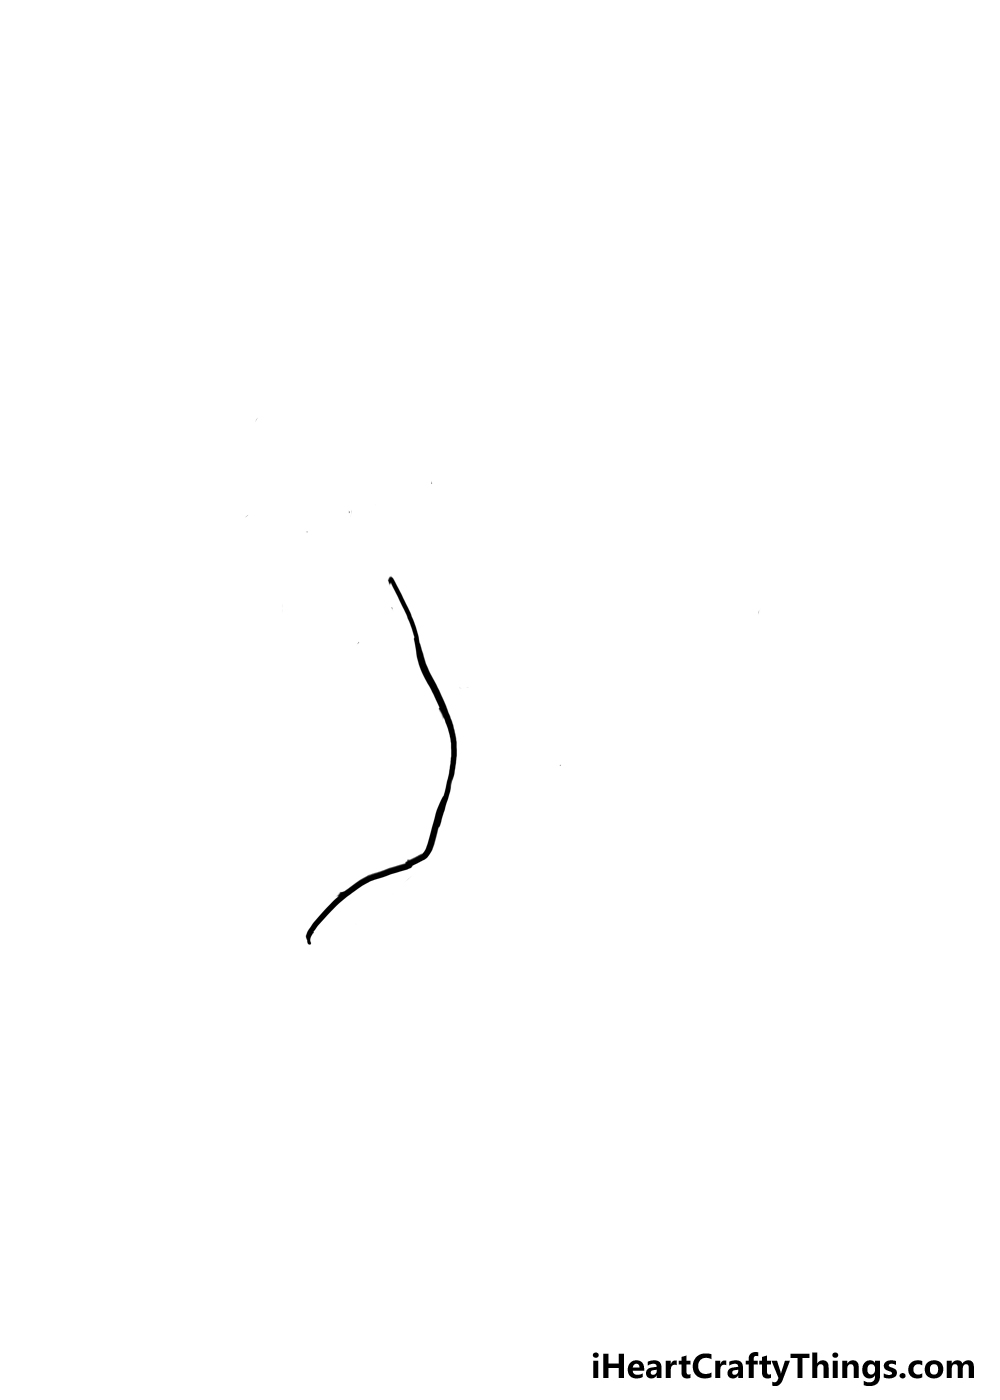 How to Draw A Willow Tree step 1